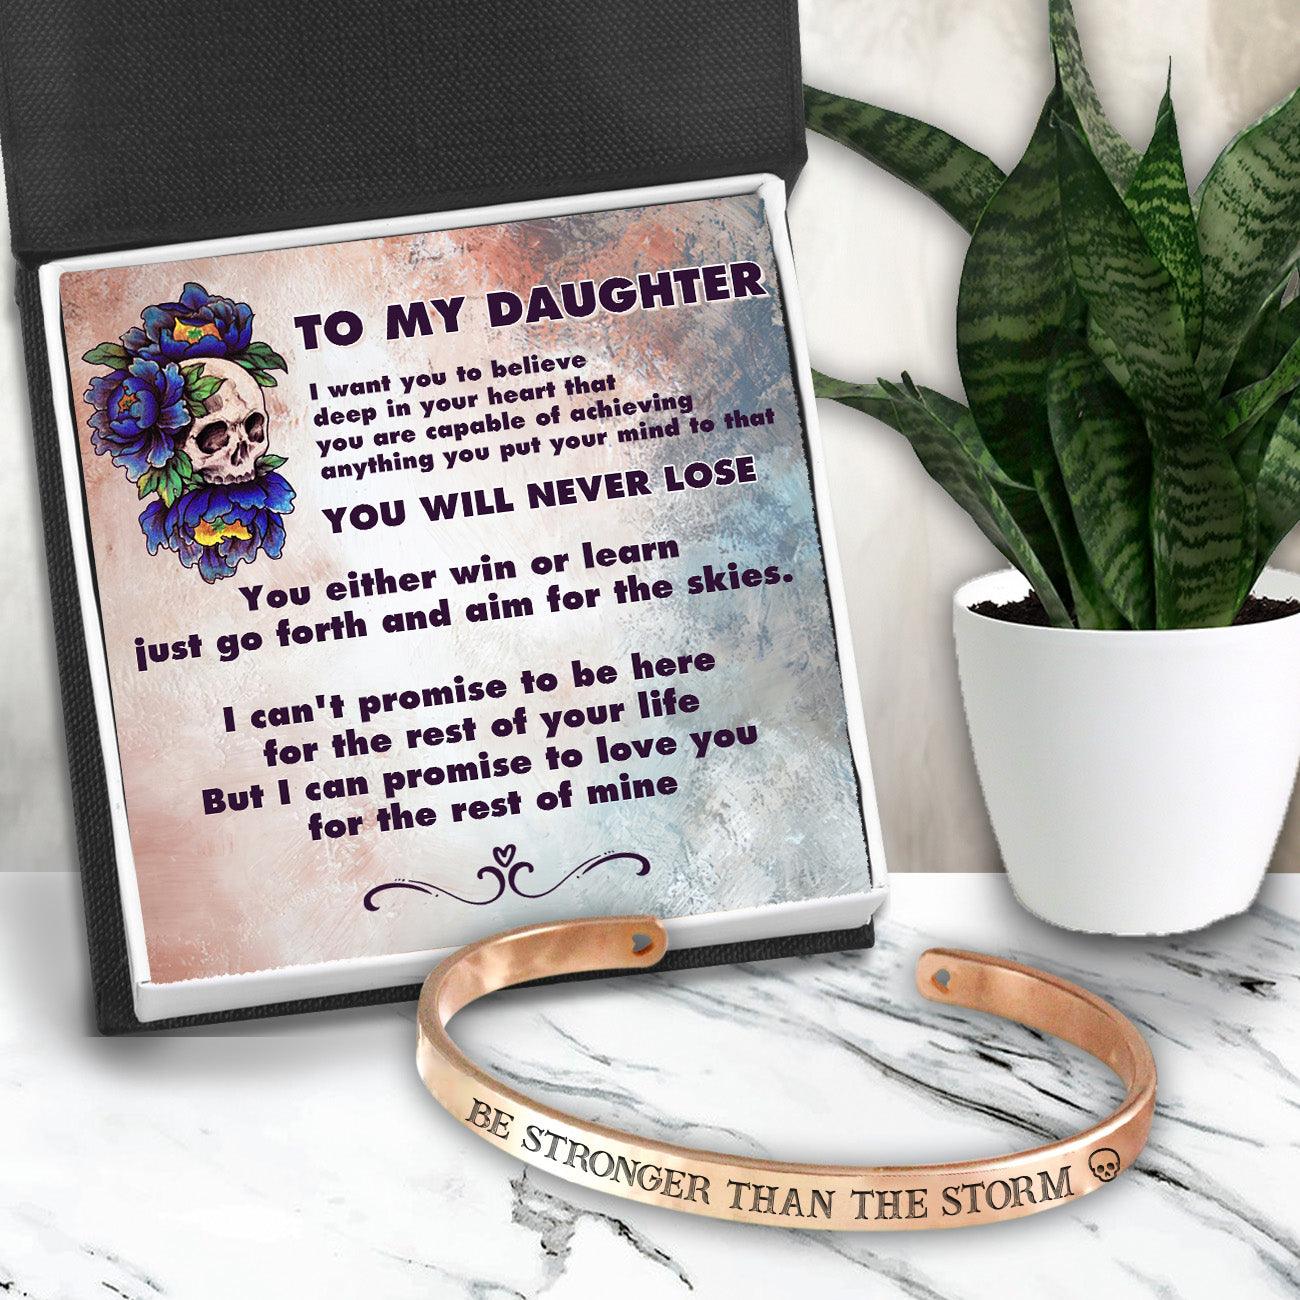 Skull Bracelet - Skull & Tattoo - To My Daughter - Go Forth And Aim For The Skies - Augbzf17005 - Gifts Holder